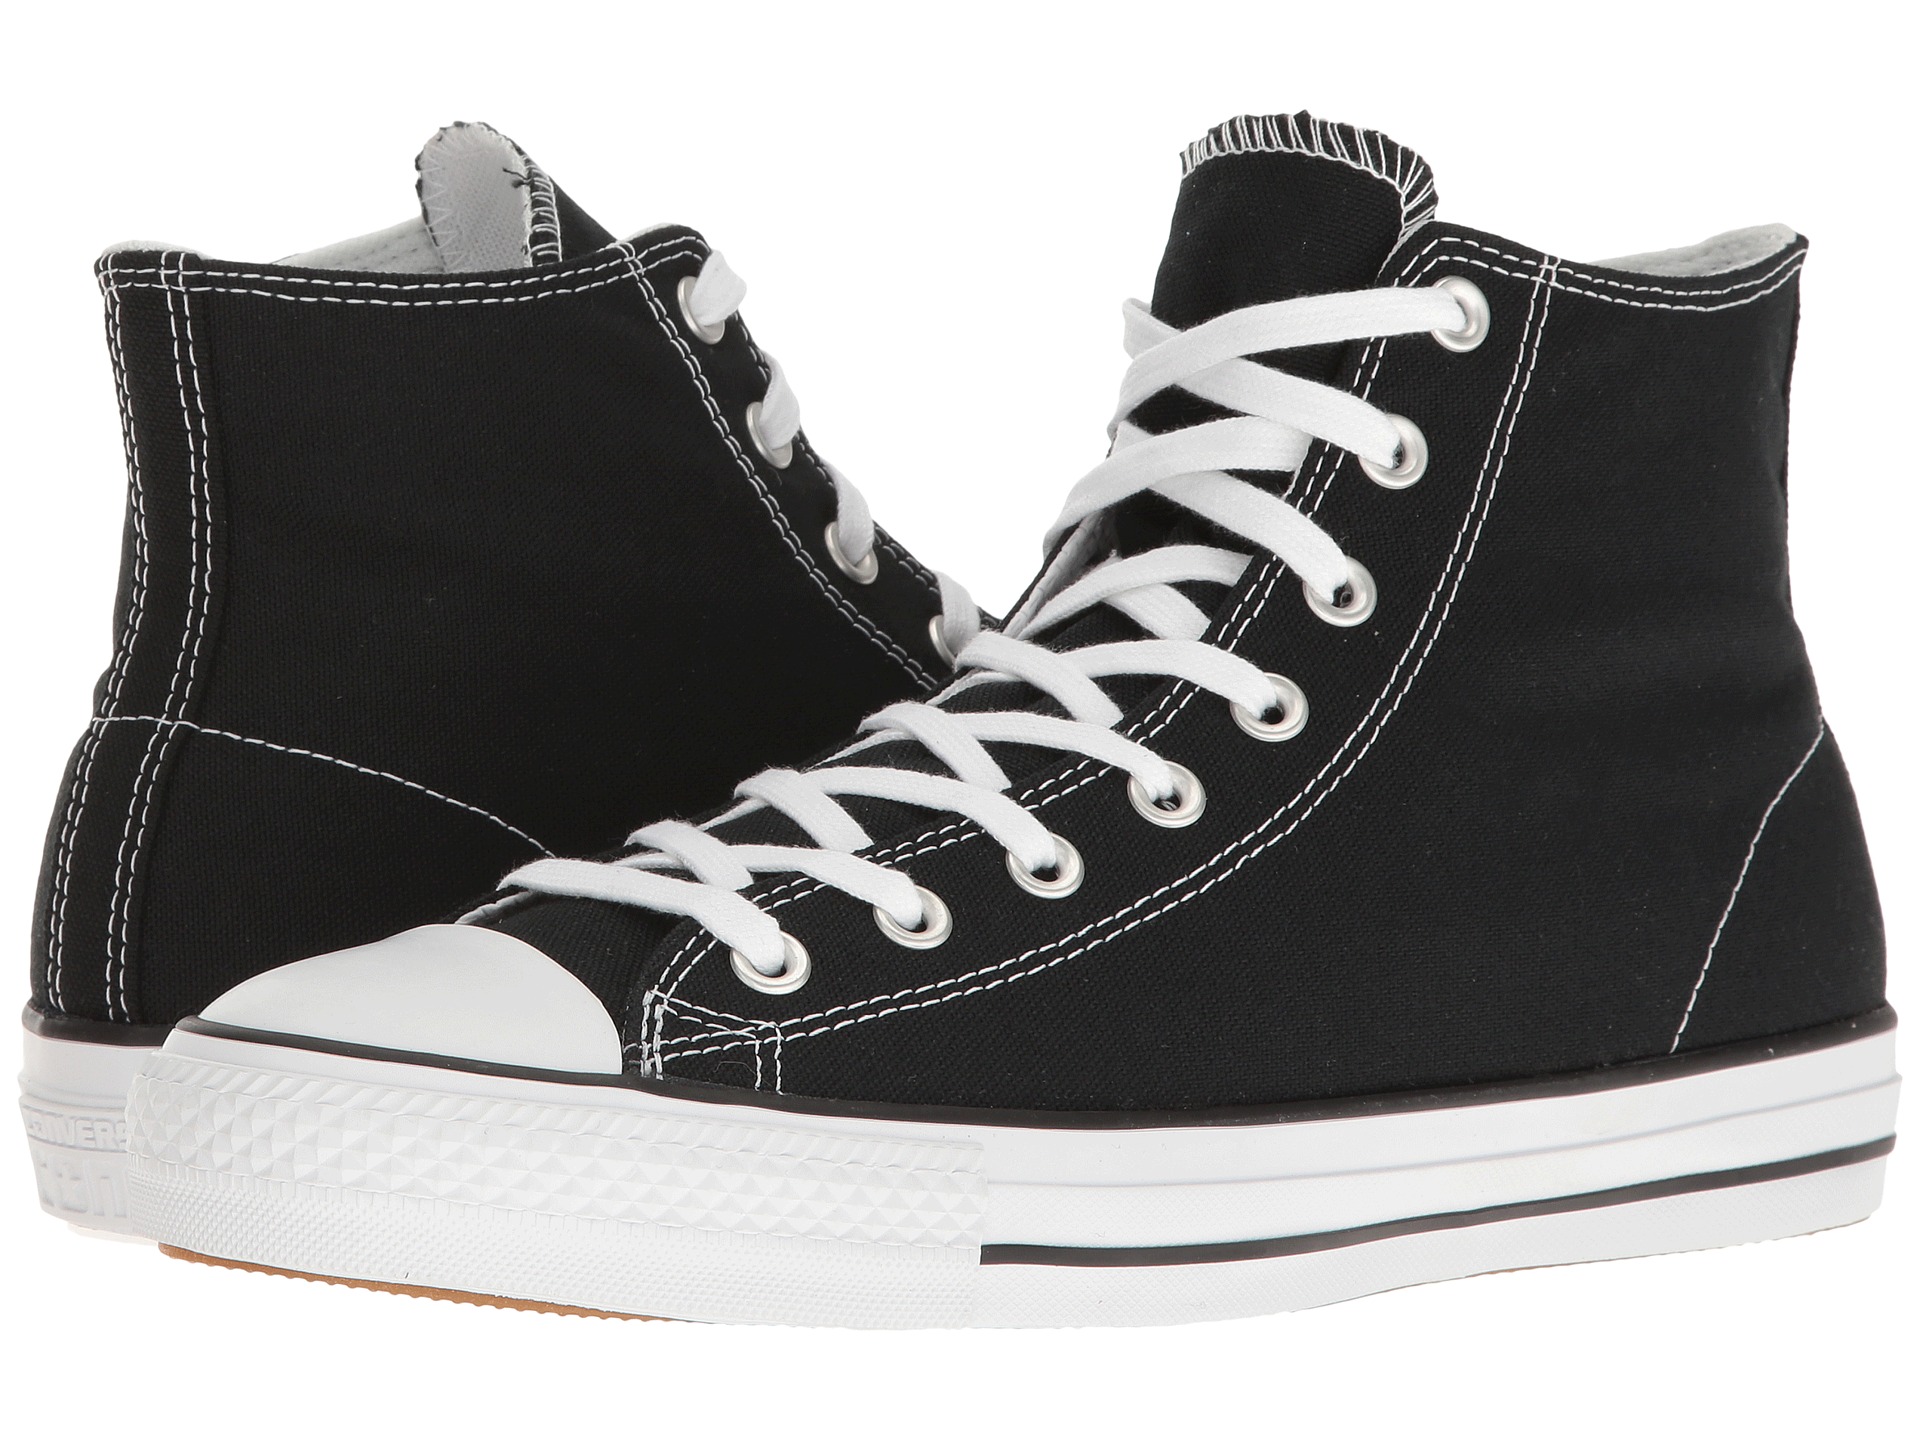 Converse Skate Chuck Taylor® All Star® Pro Rubber Infused Canvas Hi ...